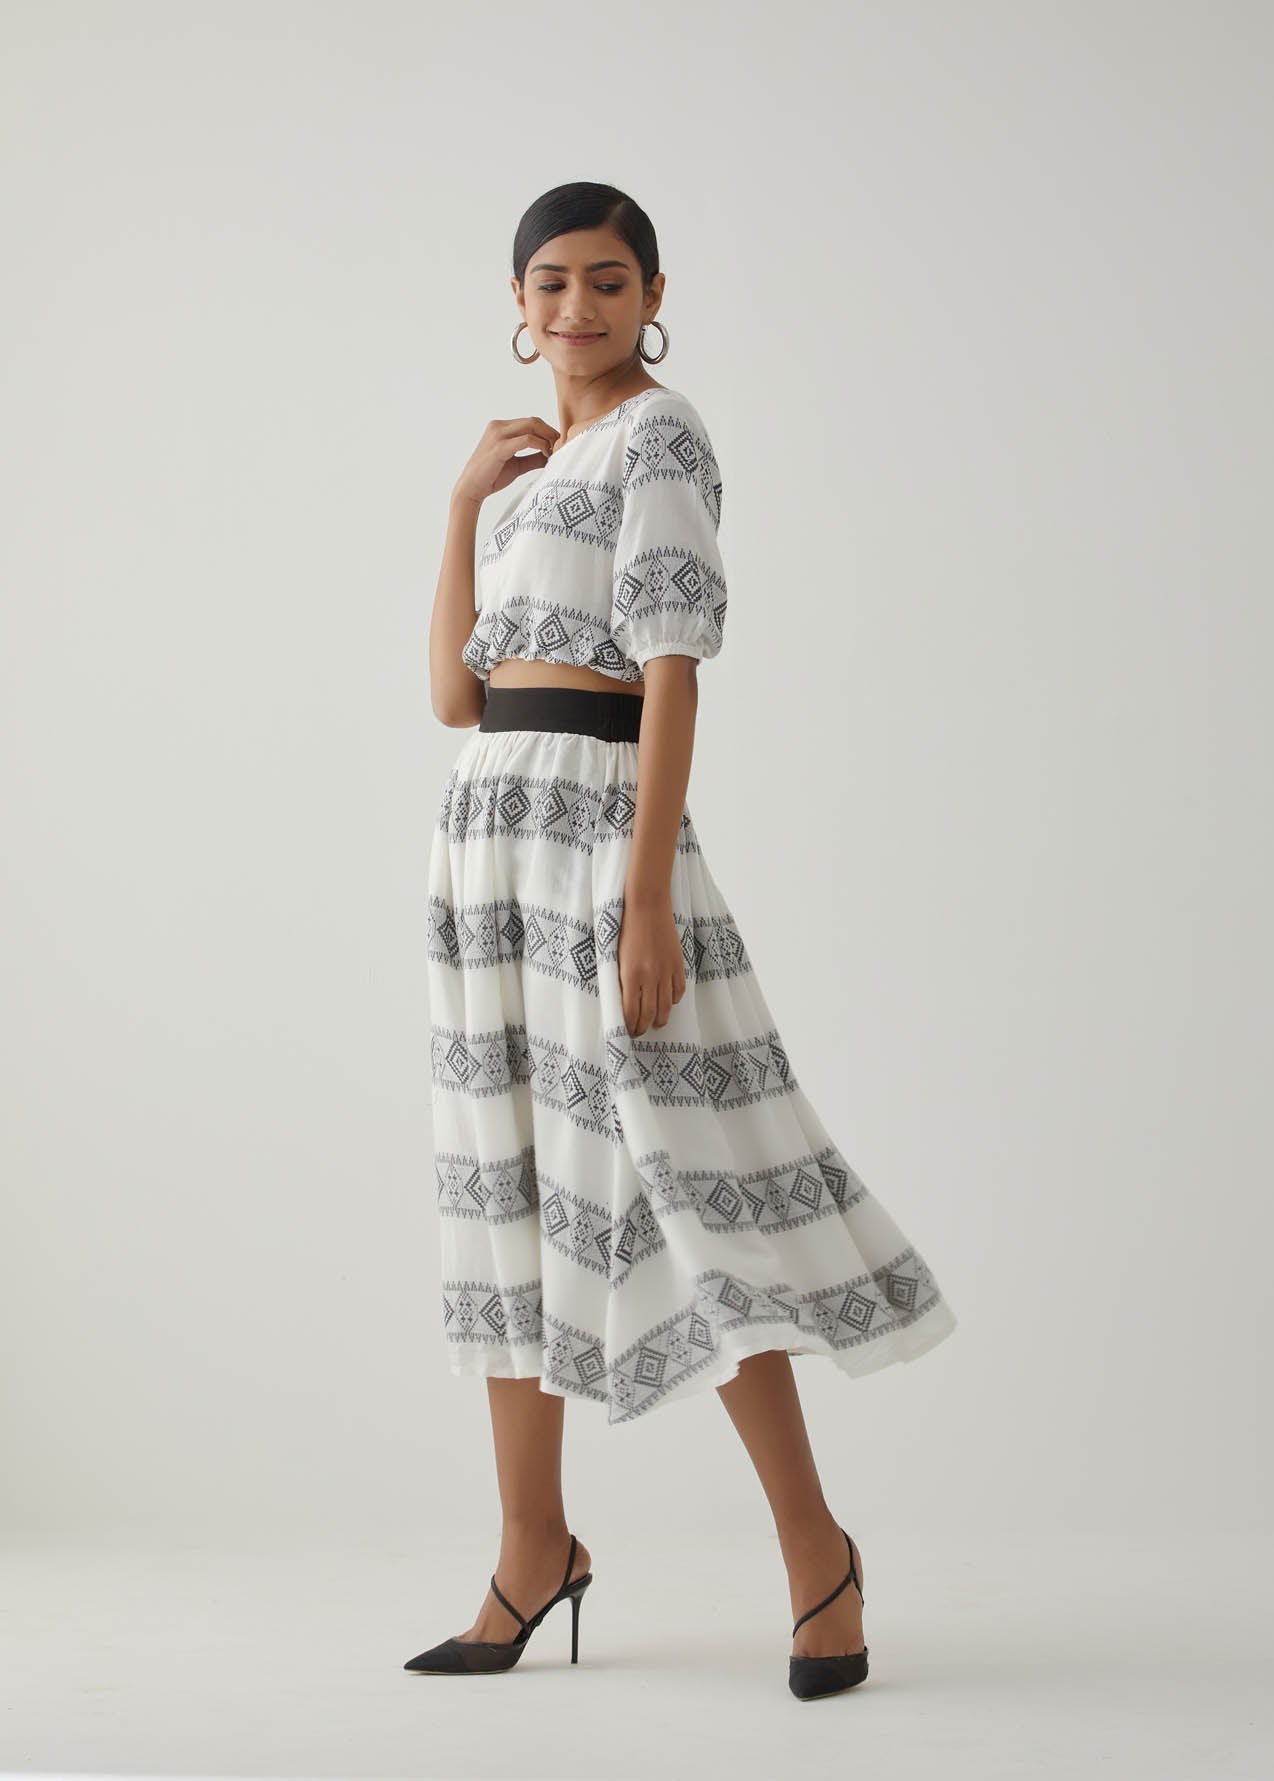 White/Black Crop Top Skirt Set - The Indian Cause